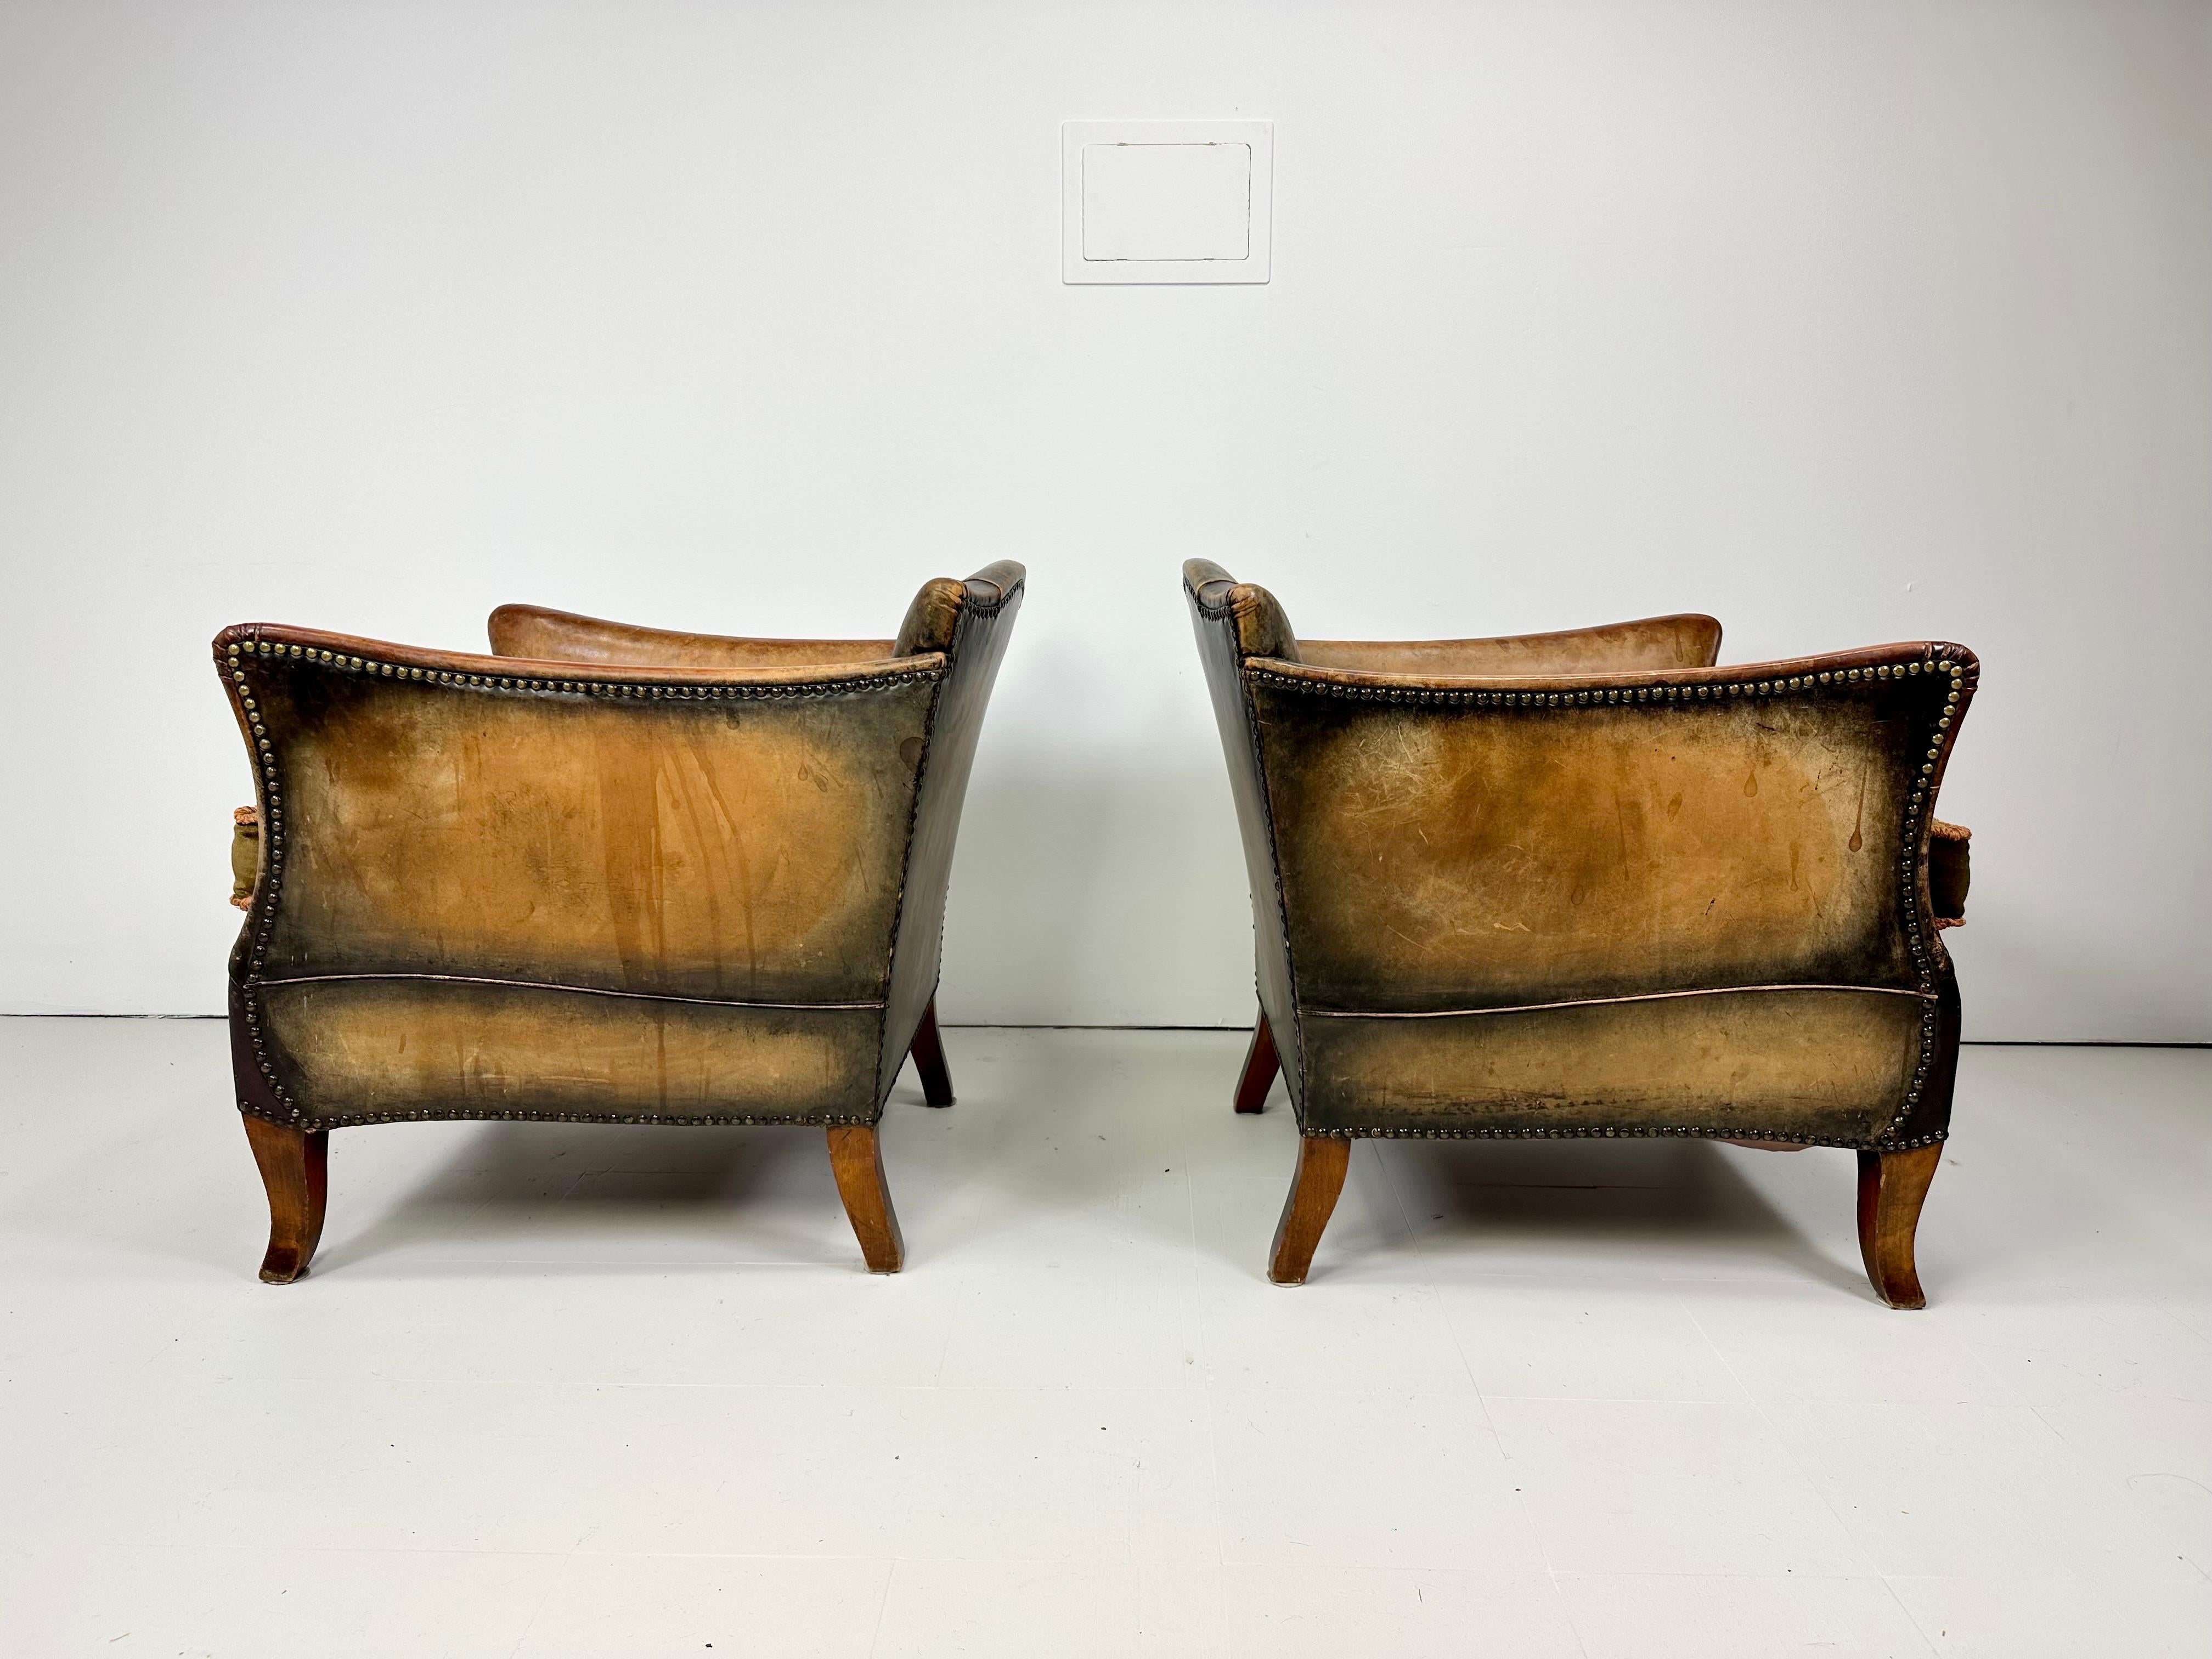 Pair of 1930’s European Leather Lounge Chairs. Original leather patina with nailhead details. Reupholstered velvet seat cushion.